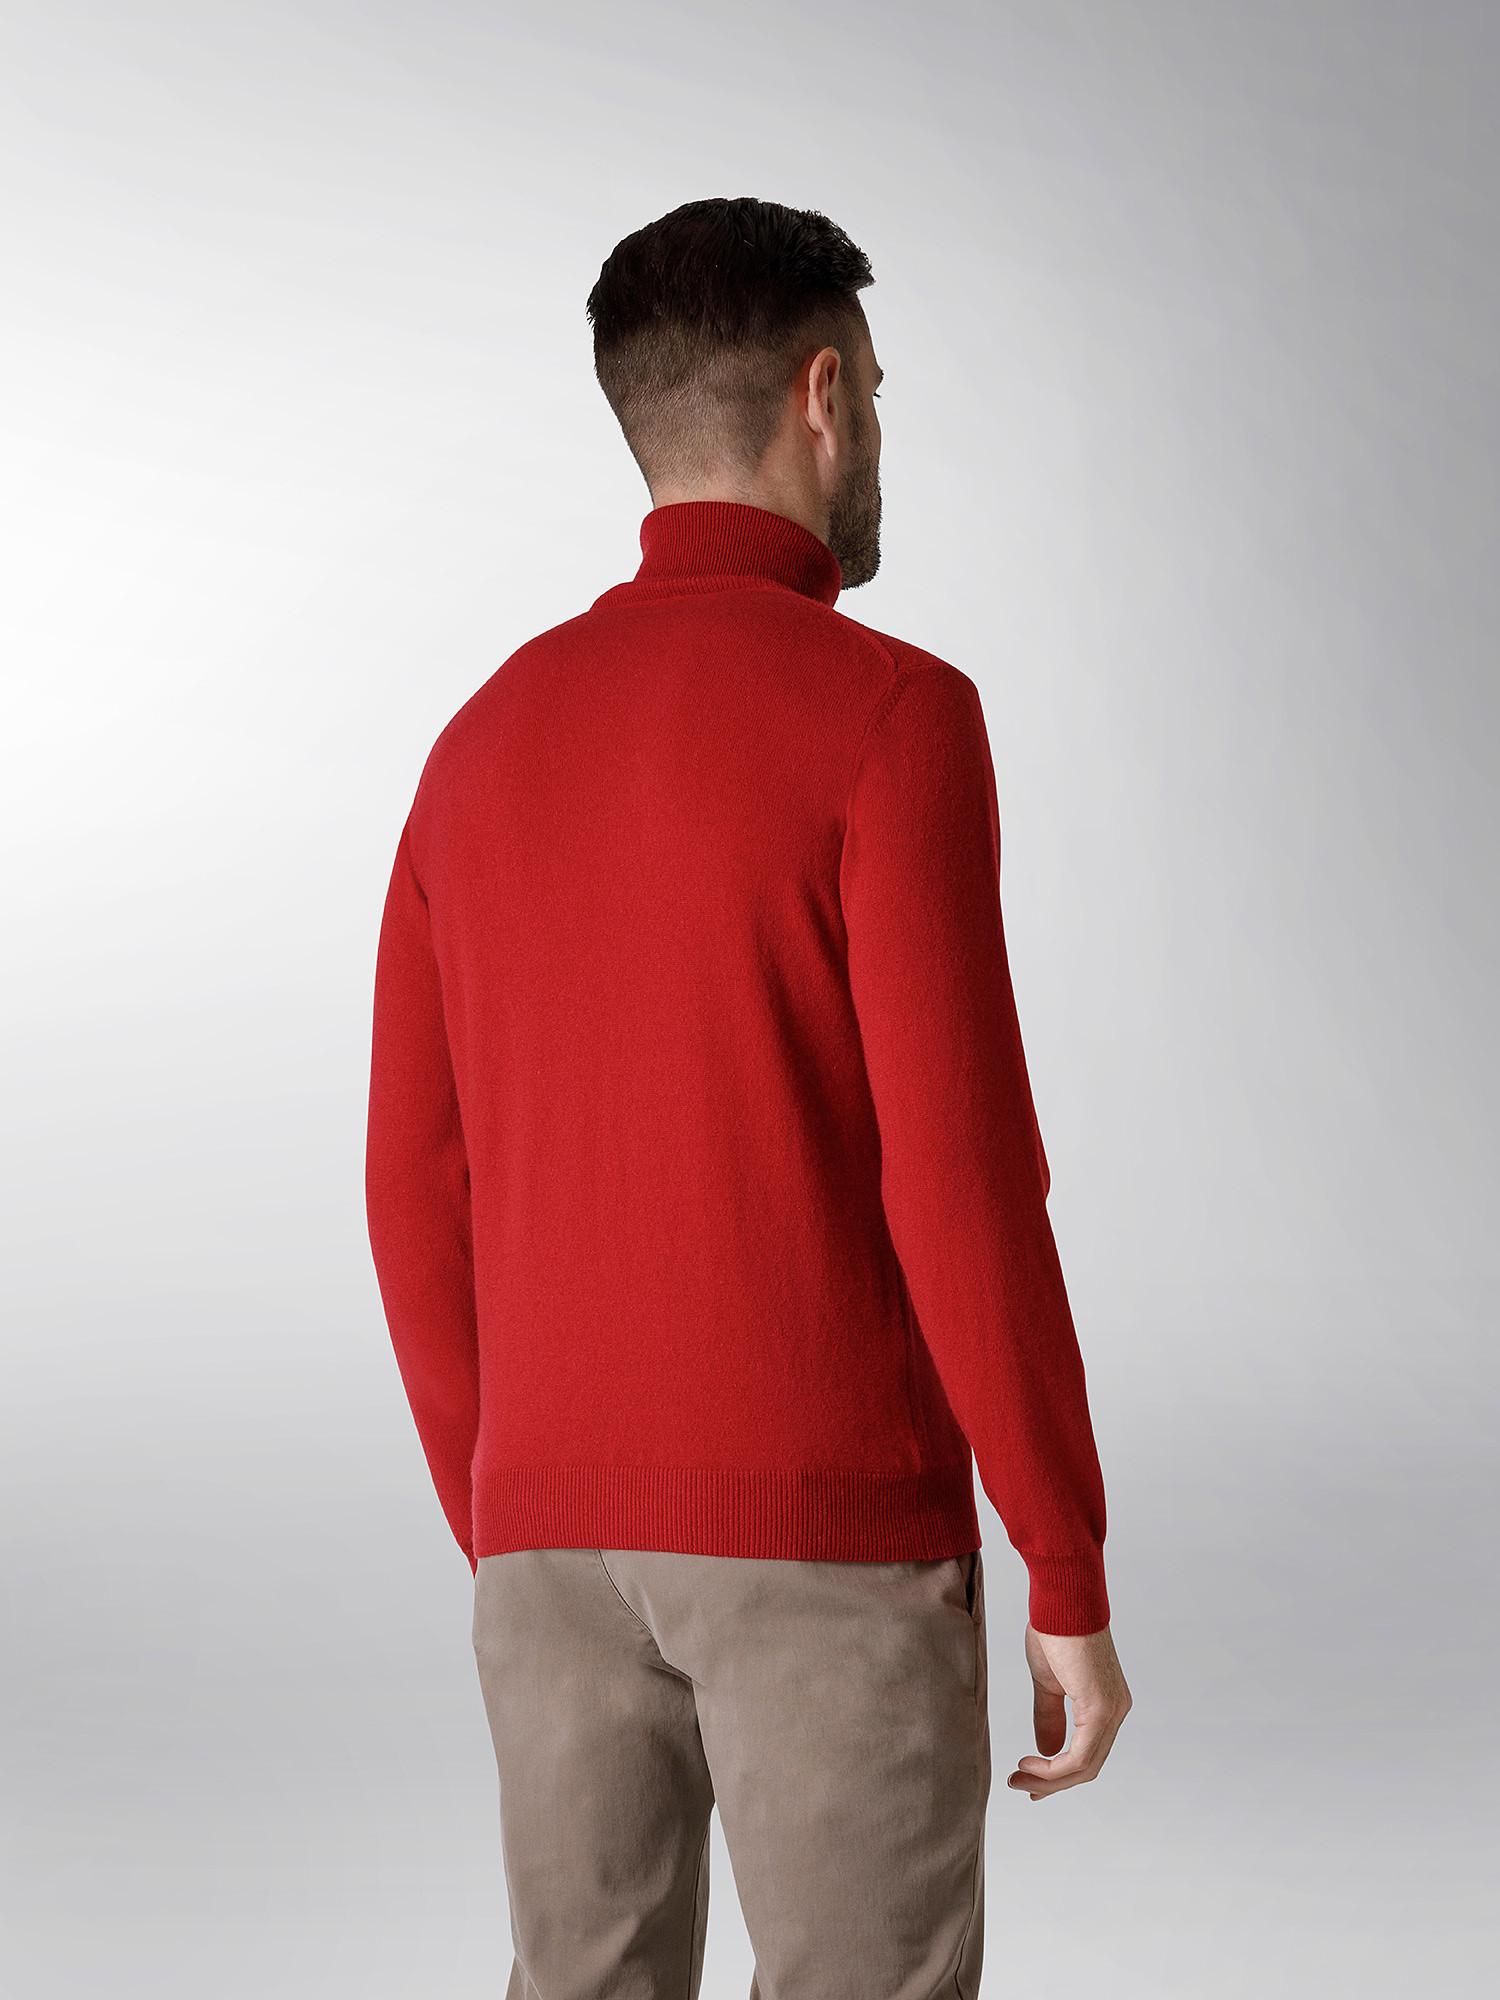 Coin Cashmere - Dolcevita in puro cashmere, Rosso, large image number 2